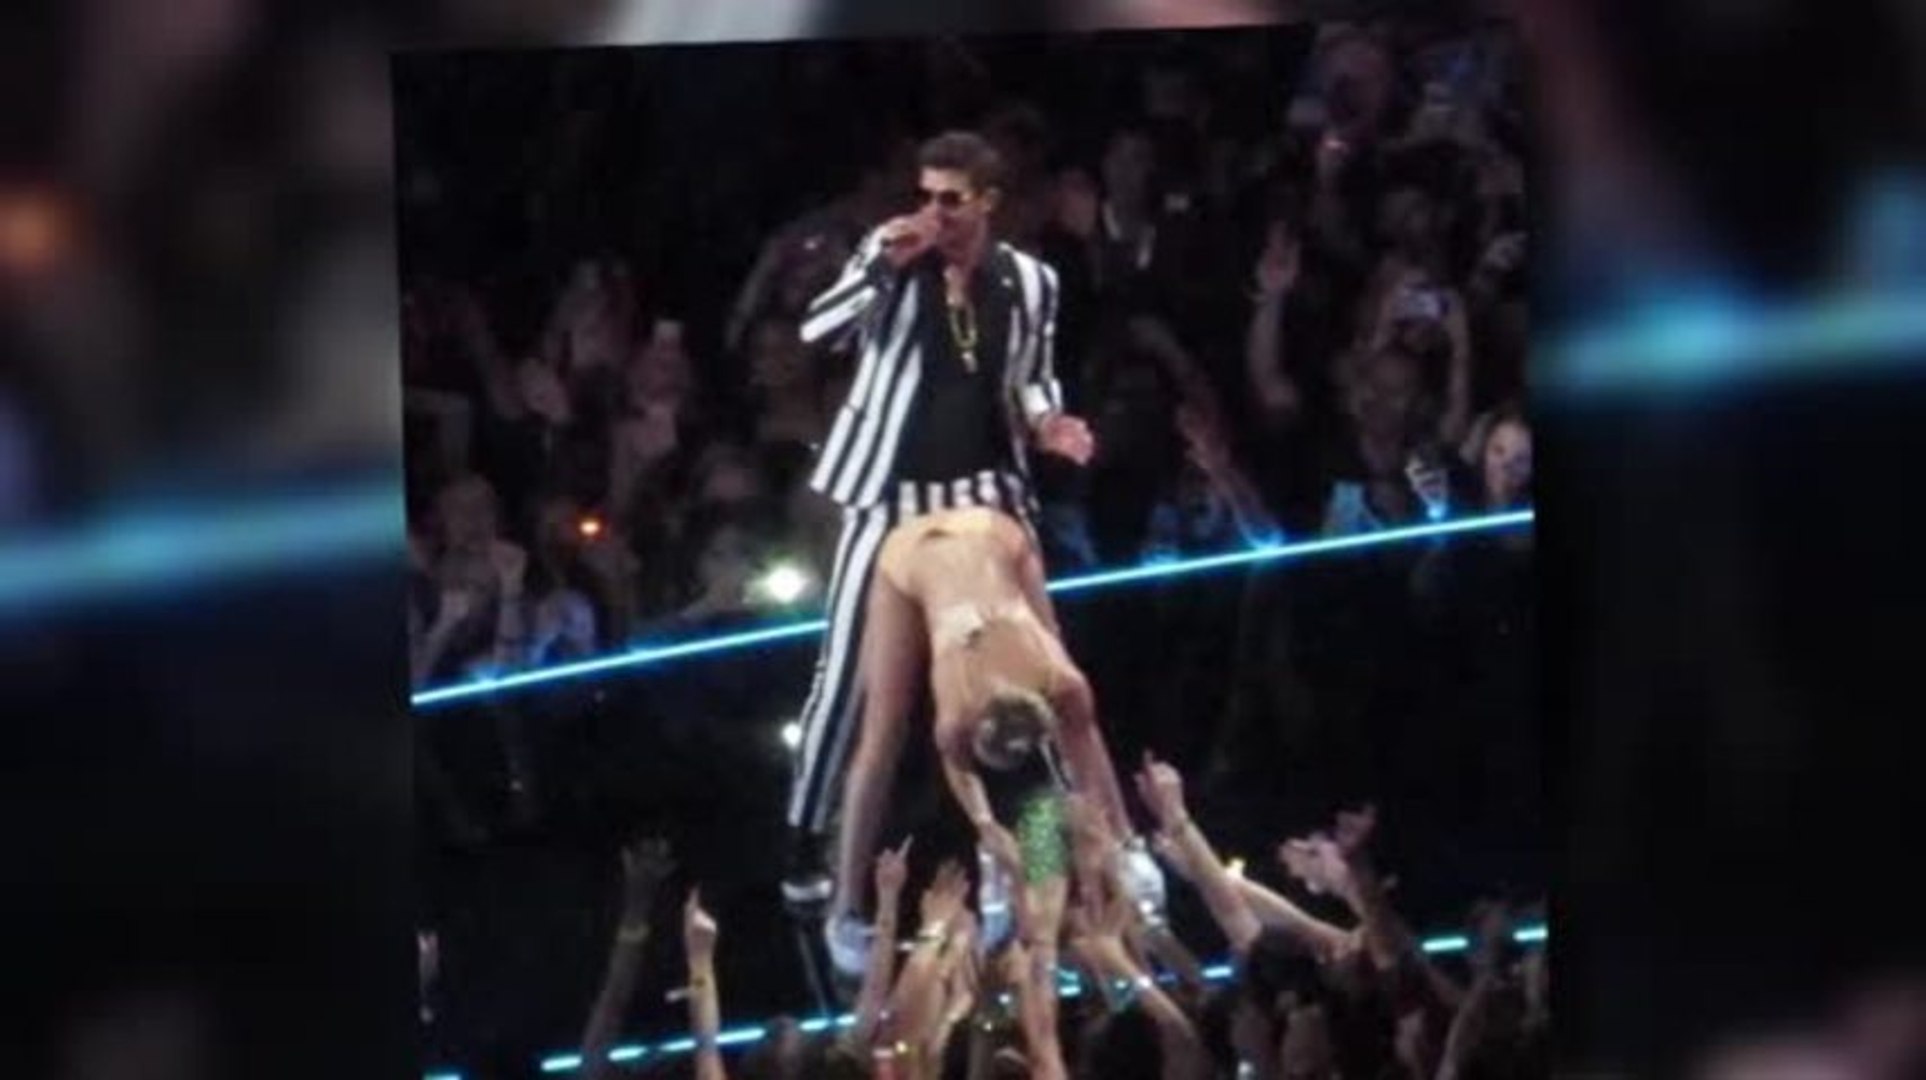 Miley Cyrus Uses a Foam Hand as a Sexual Prop at the MTV VMAs